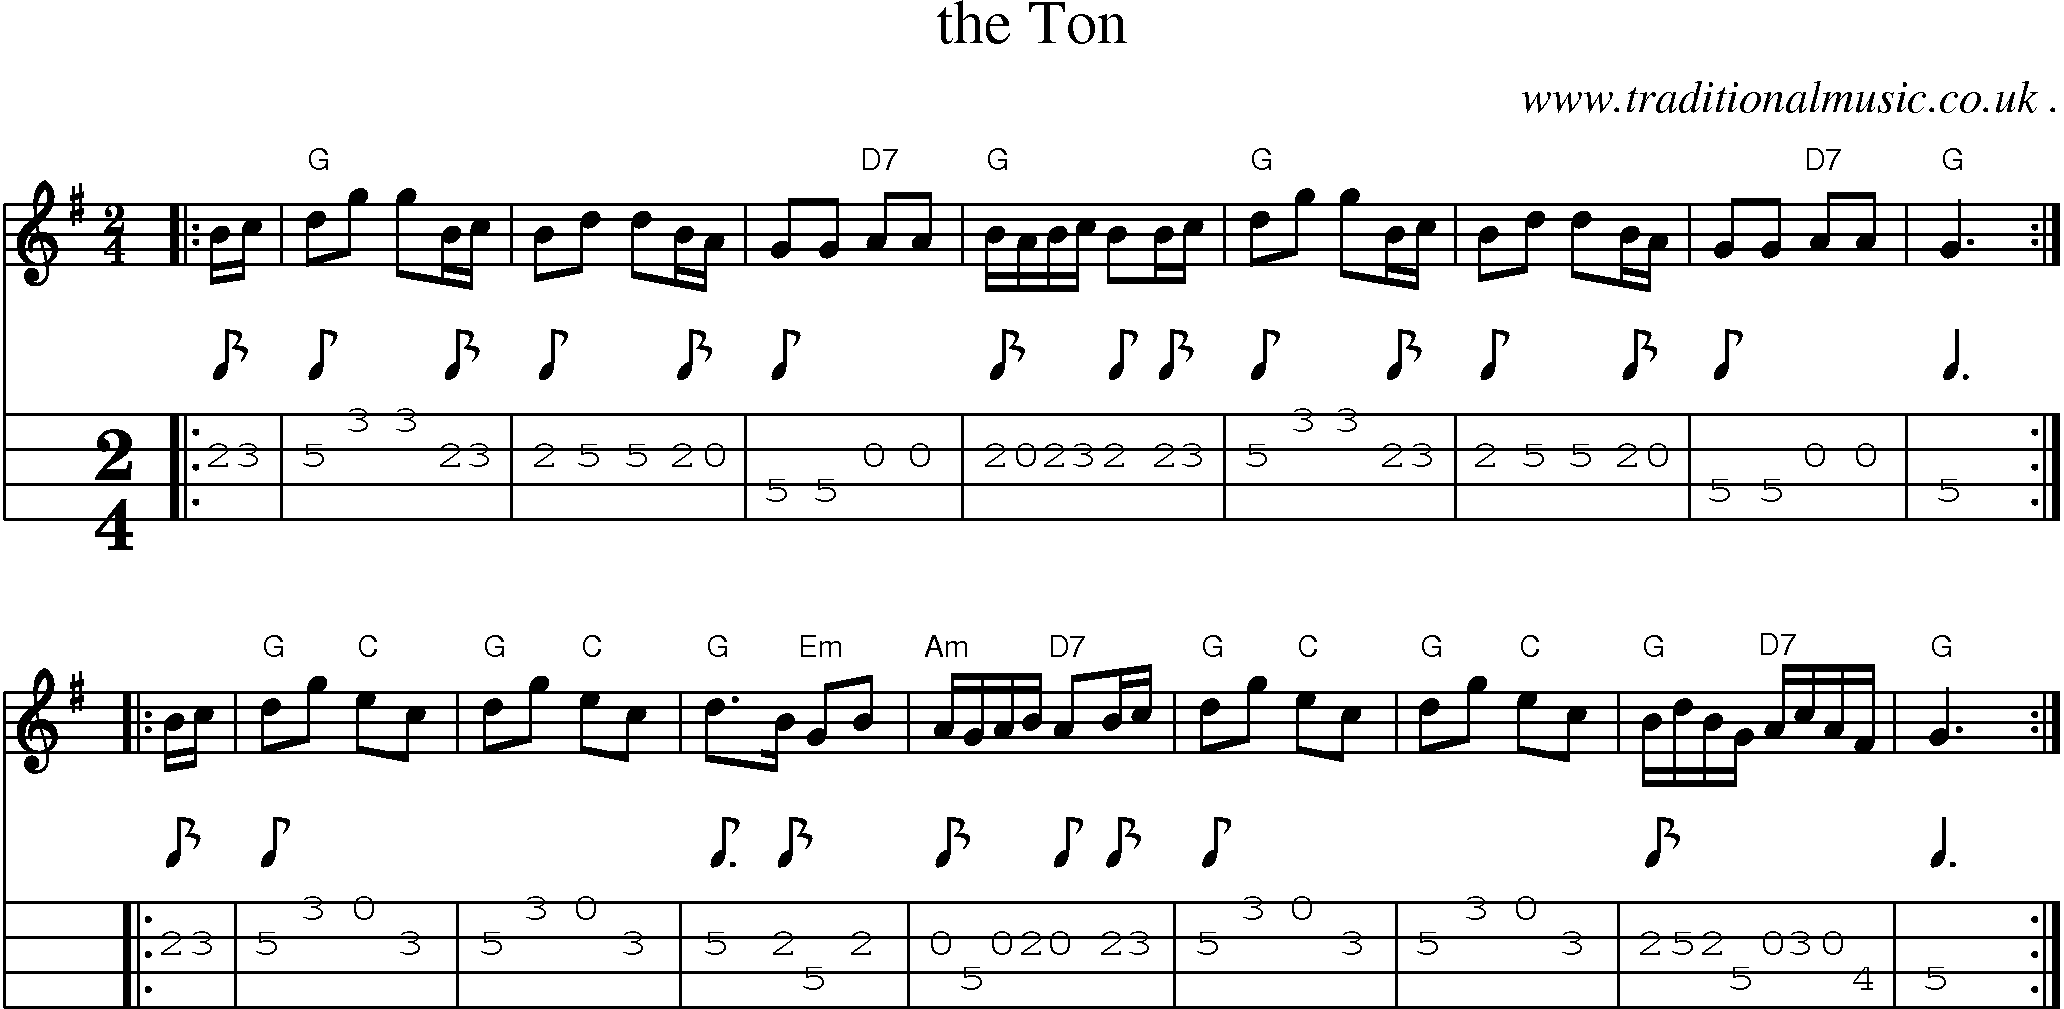 Sheet-music  score, Chords and Mandolin Tabs for The Ton